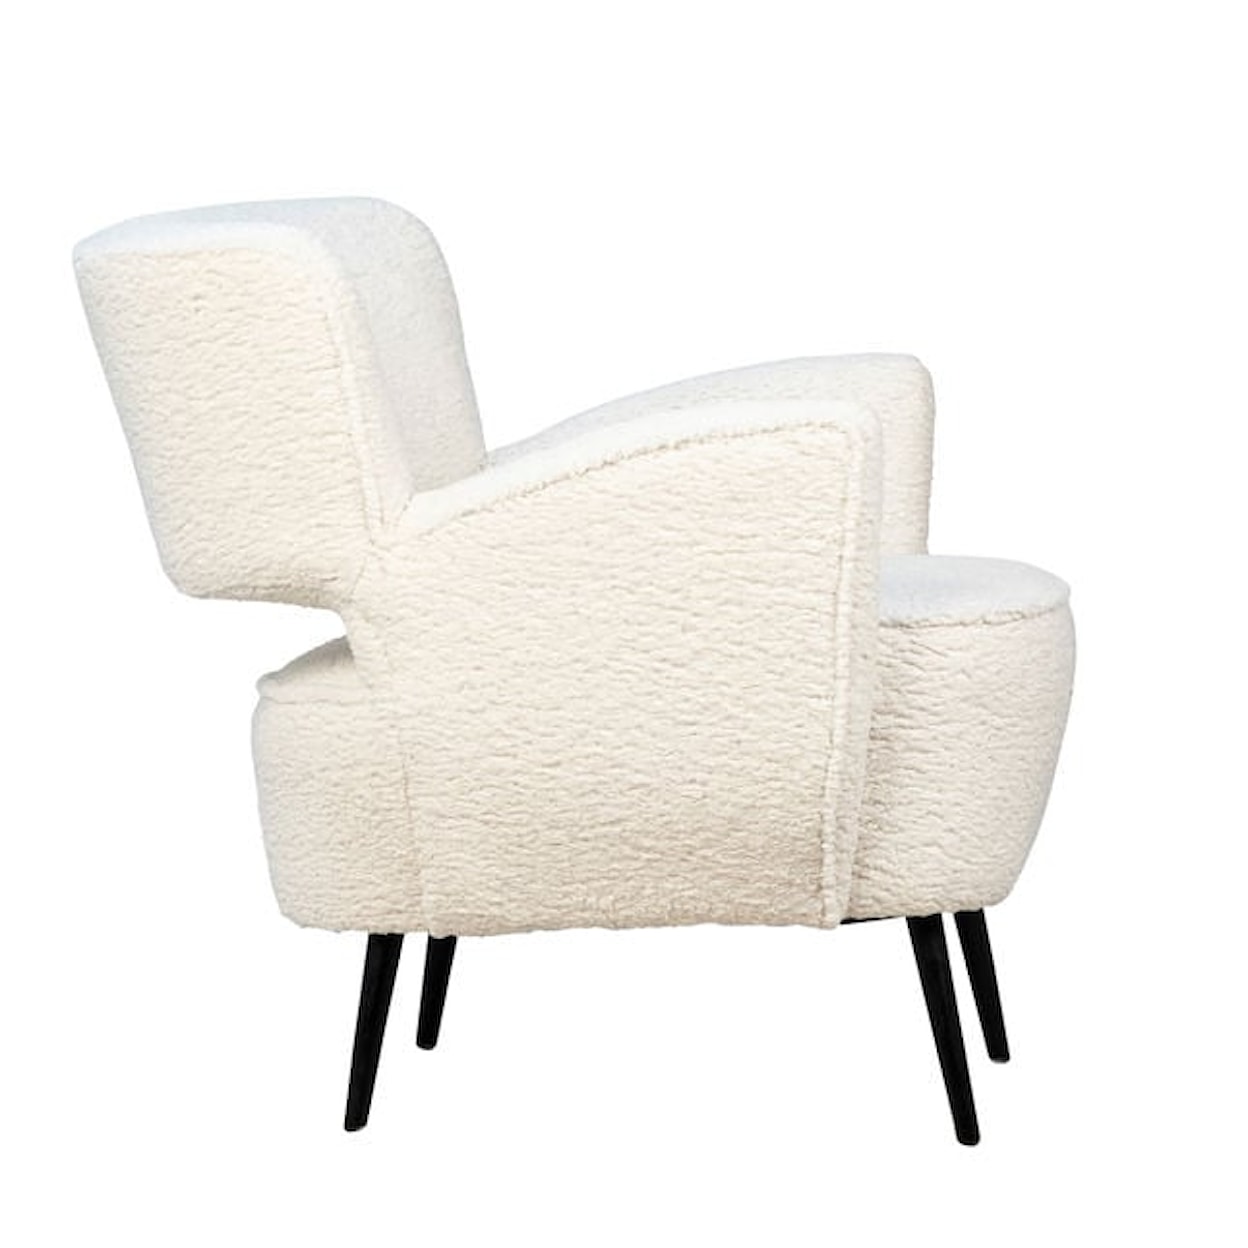 Dovetail Furniture Upholstery Alana Occasional Chair